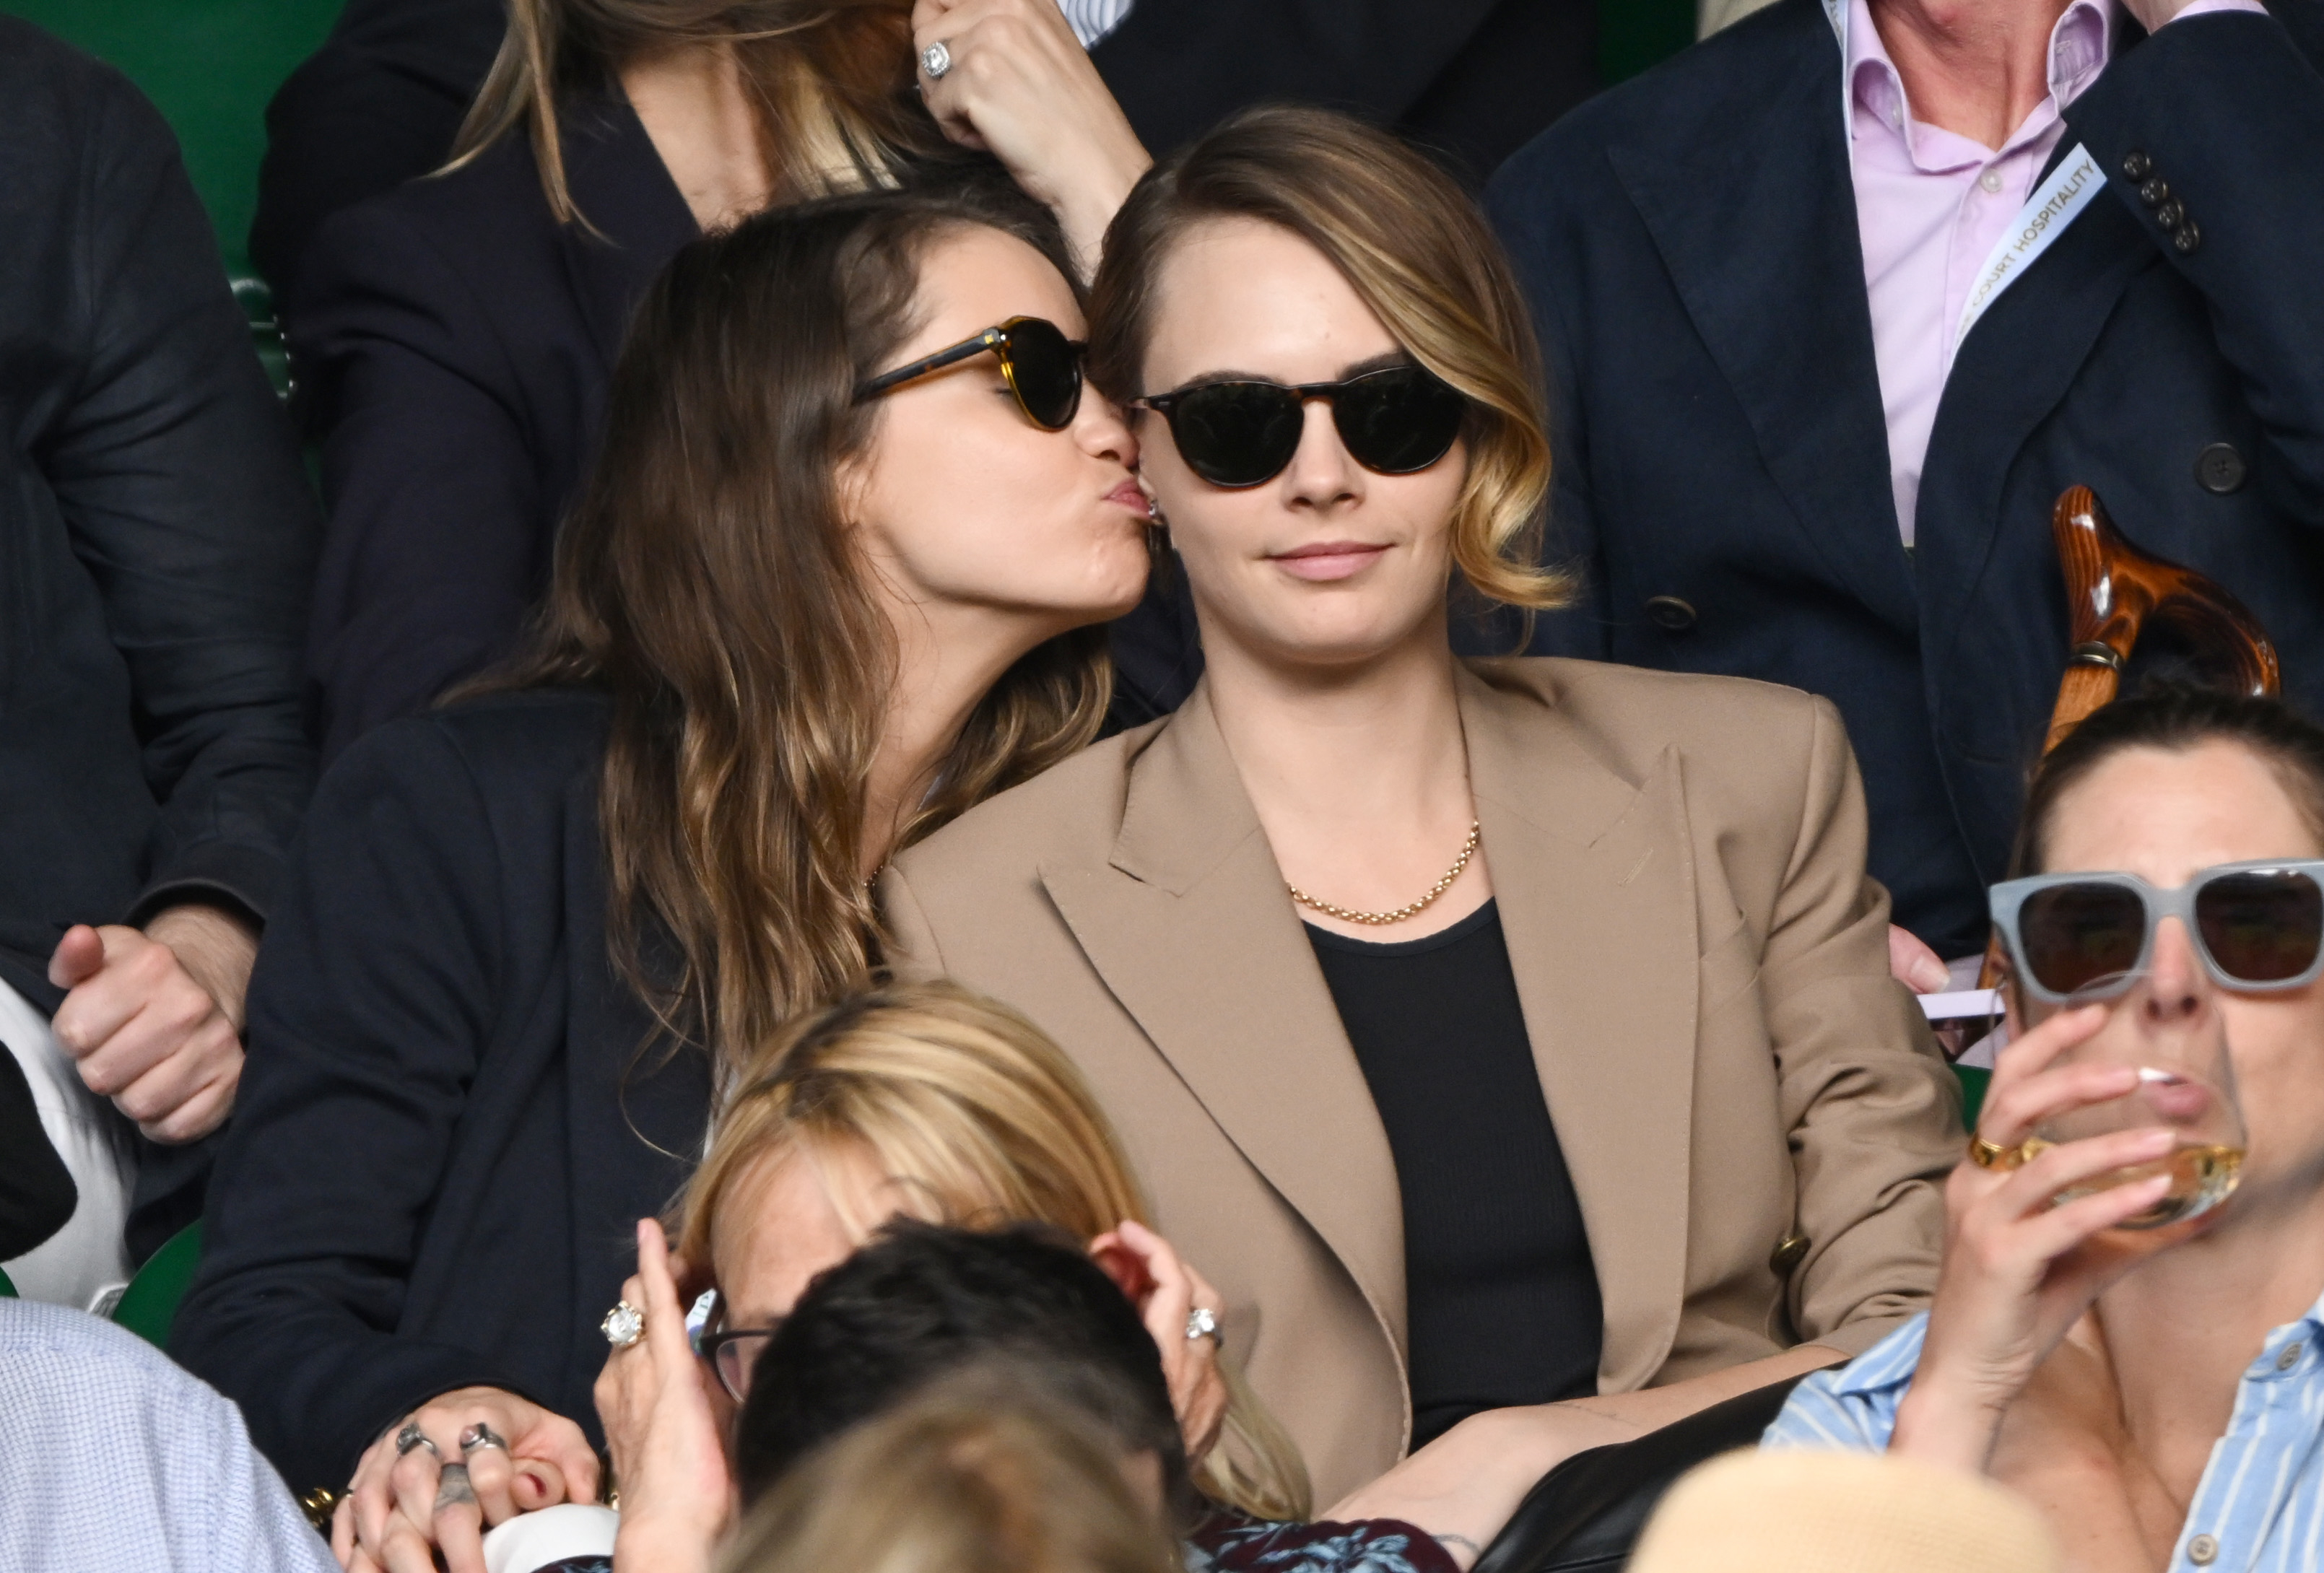 Minke kisses Cara Delevingne on the cheek while they sit at an event. Both wear sunglasses and stylish blazers. Other attendees are in the background